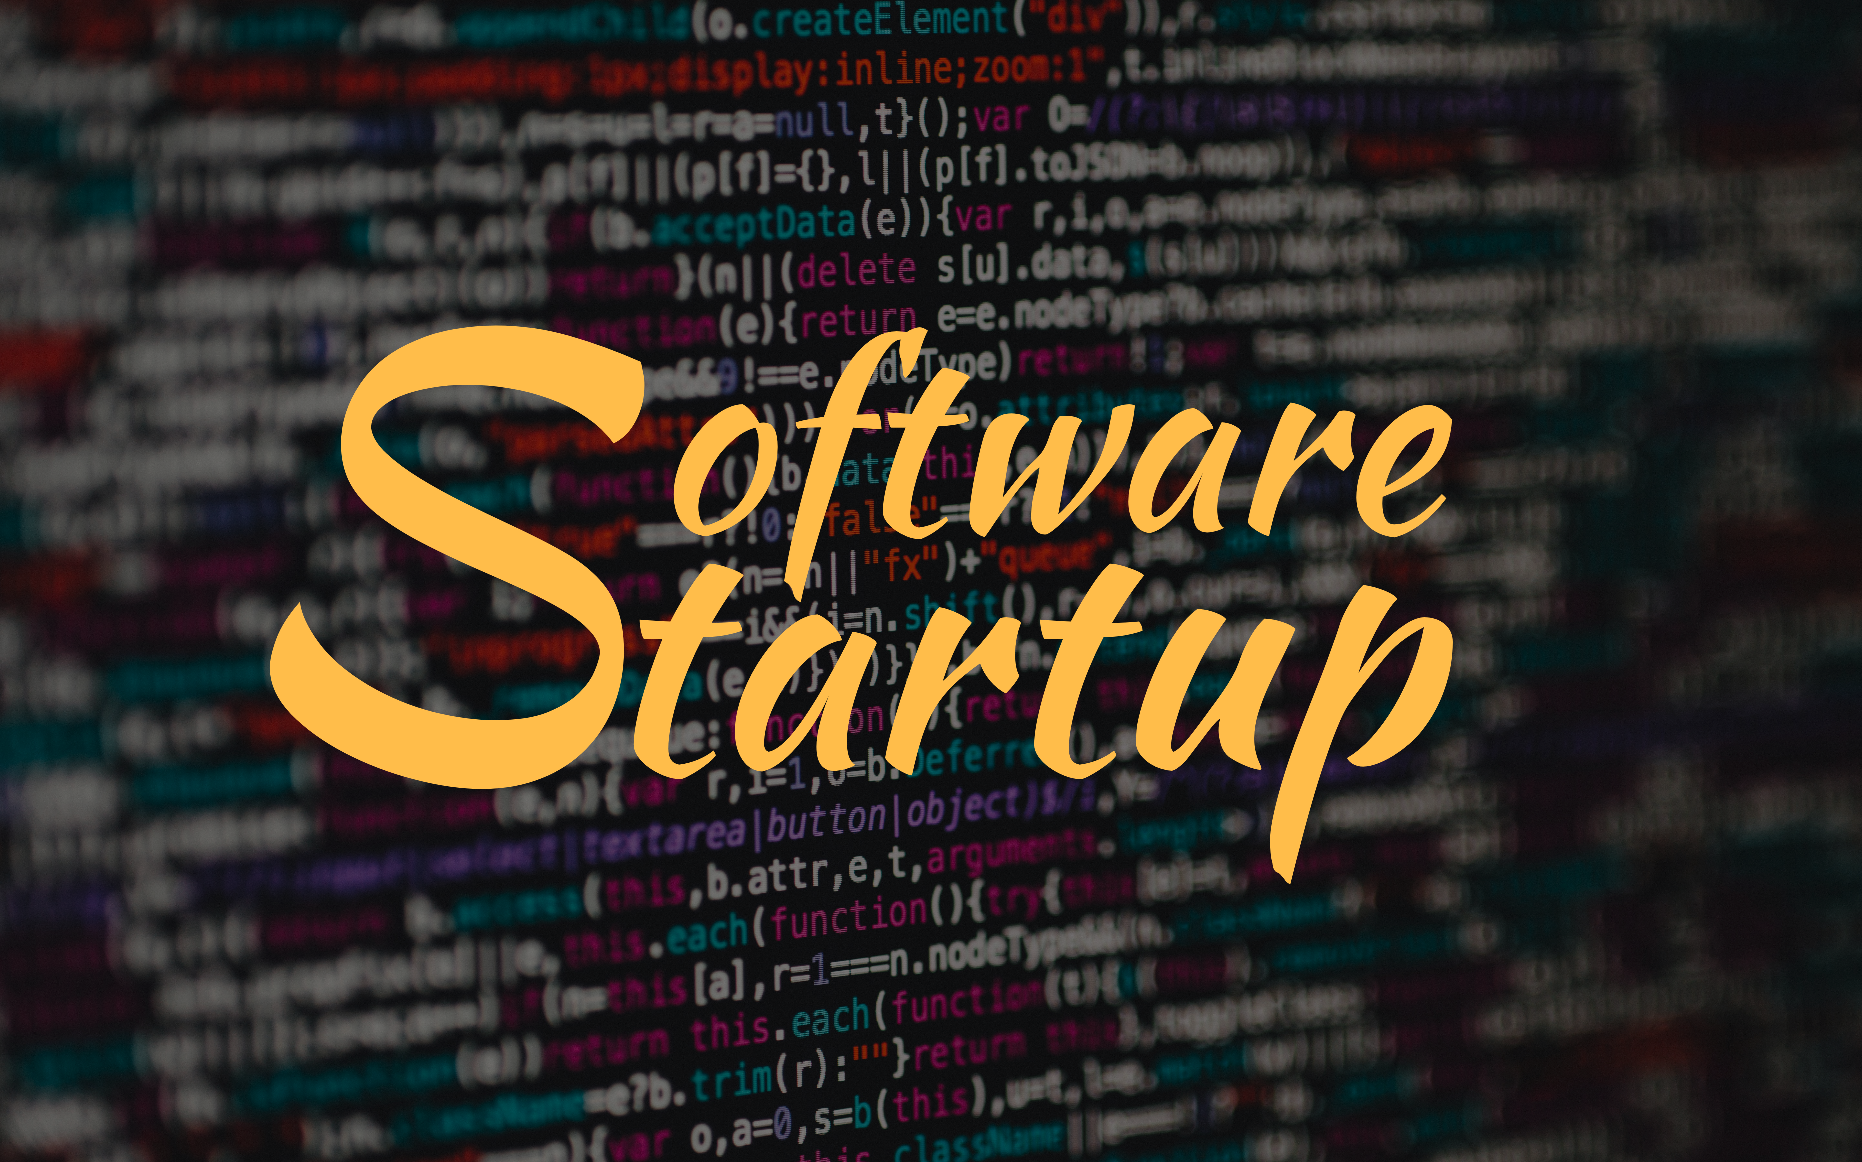 An Easy Roadmap to Create a Successful Software Startup